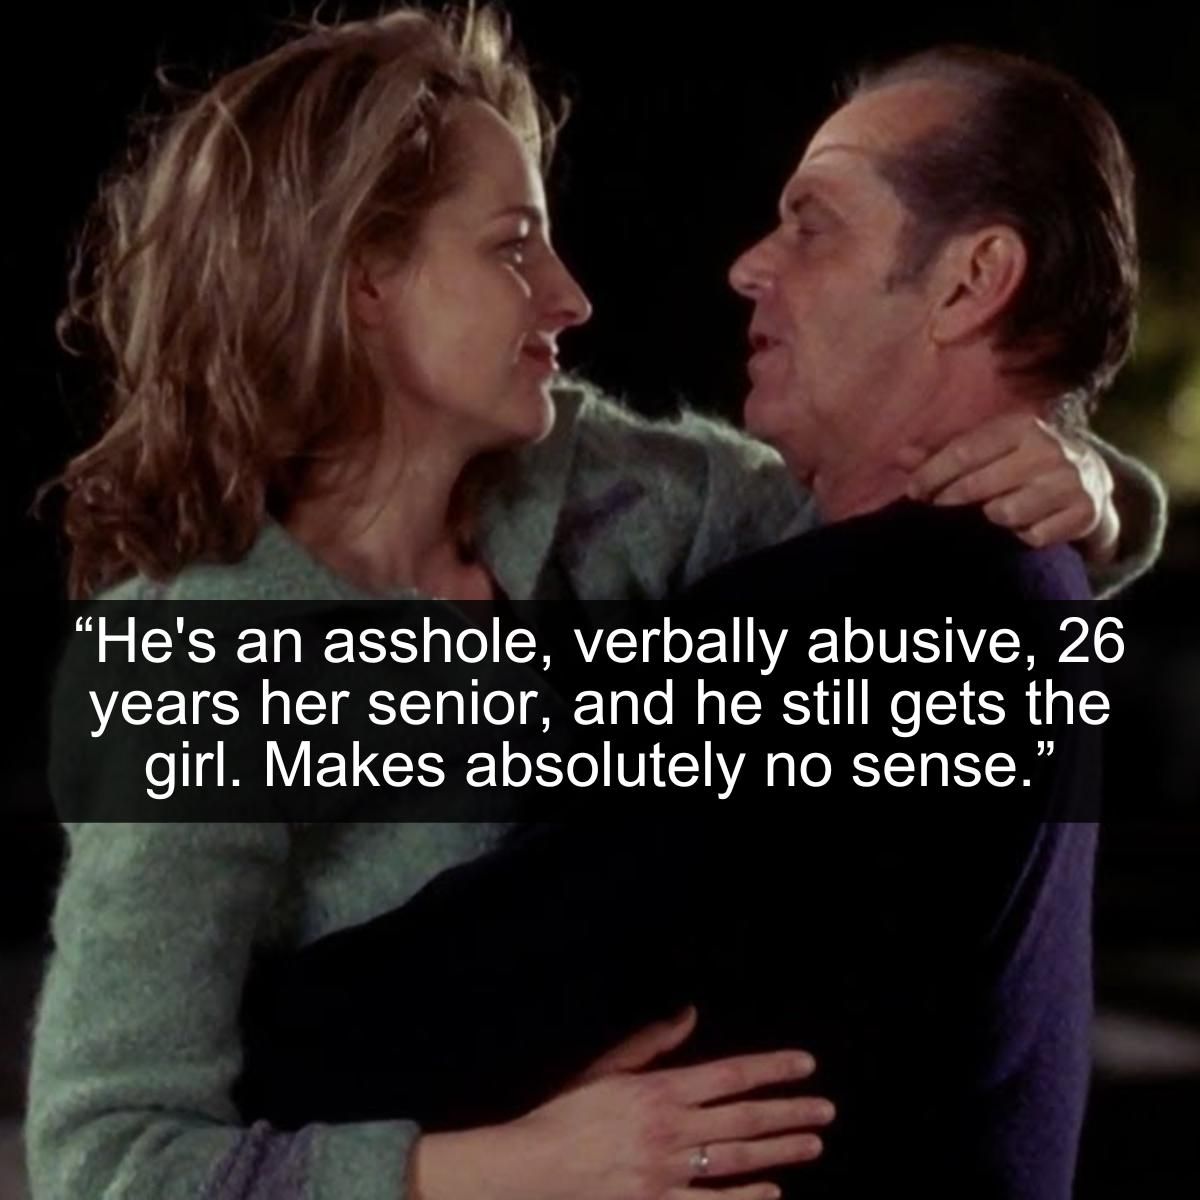 <p>The 1997 hit dramedy As Good as It Gets features Academy Award-winning actors Jack Nicholson and Helen Hunt. The two superstars play two people with difficult pasts trying to move on with their lives together. Jack Nicholson does a fantastic job playing the type of character that he's frequently cast to play: an abusive, foul-mouthed, and angry individual who somehow wins people over.</p> <p>We're not sure if these types of people exist in the real world, but if so, are they as charismatic as Nicholson? Also, why does Helen Hunt's character fall for him? The age difference isn't that big a deal since they're both consenting adults. What is a big deal is the fact that this guy is so unwell and abusive that he shouldn't be with anyone at all. Come on Carol, you can do way better than Melvin!</p>